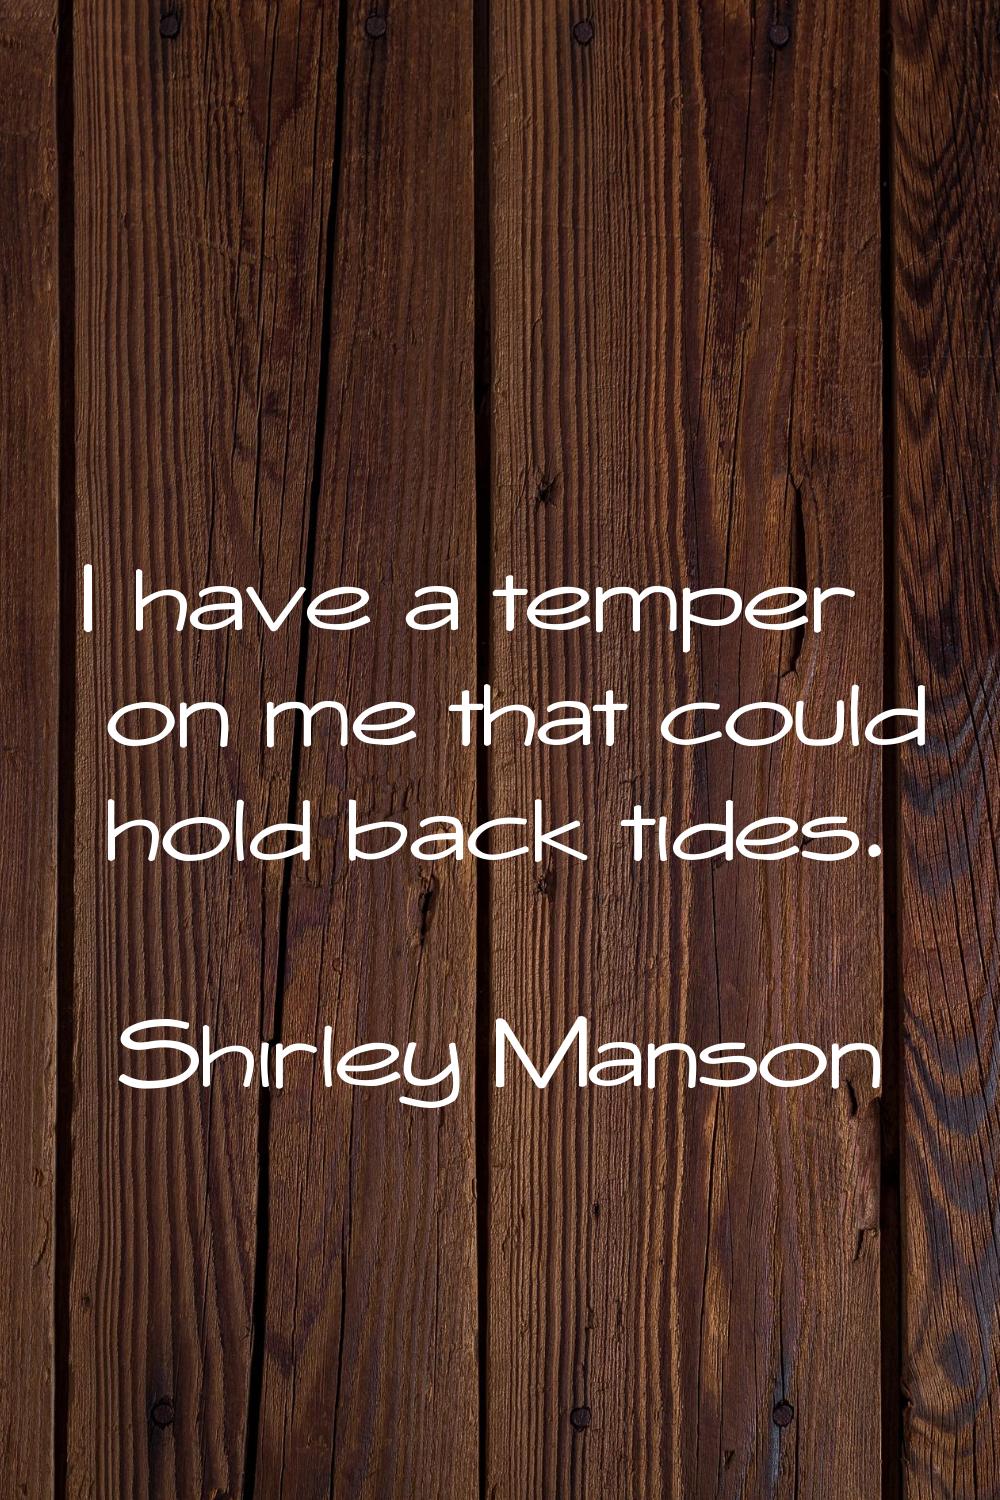 I have a temper on me that could hold back tides.